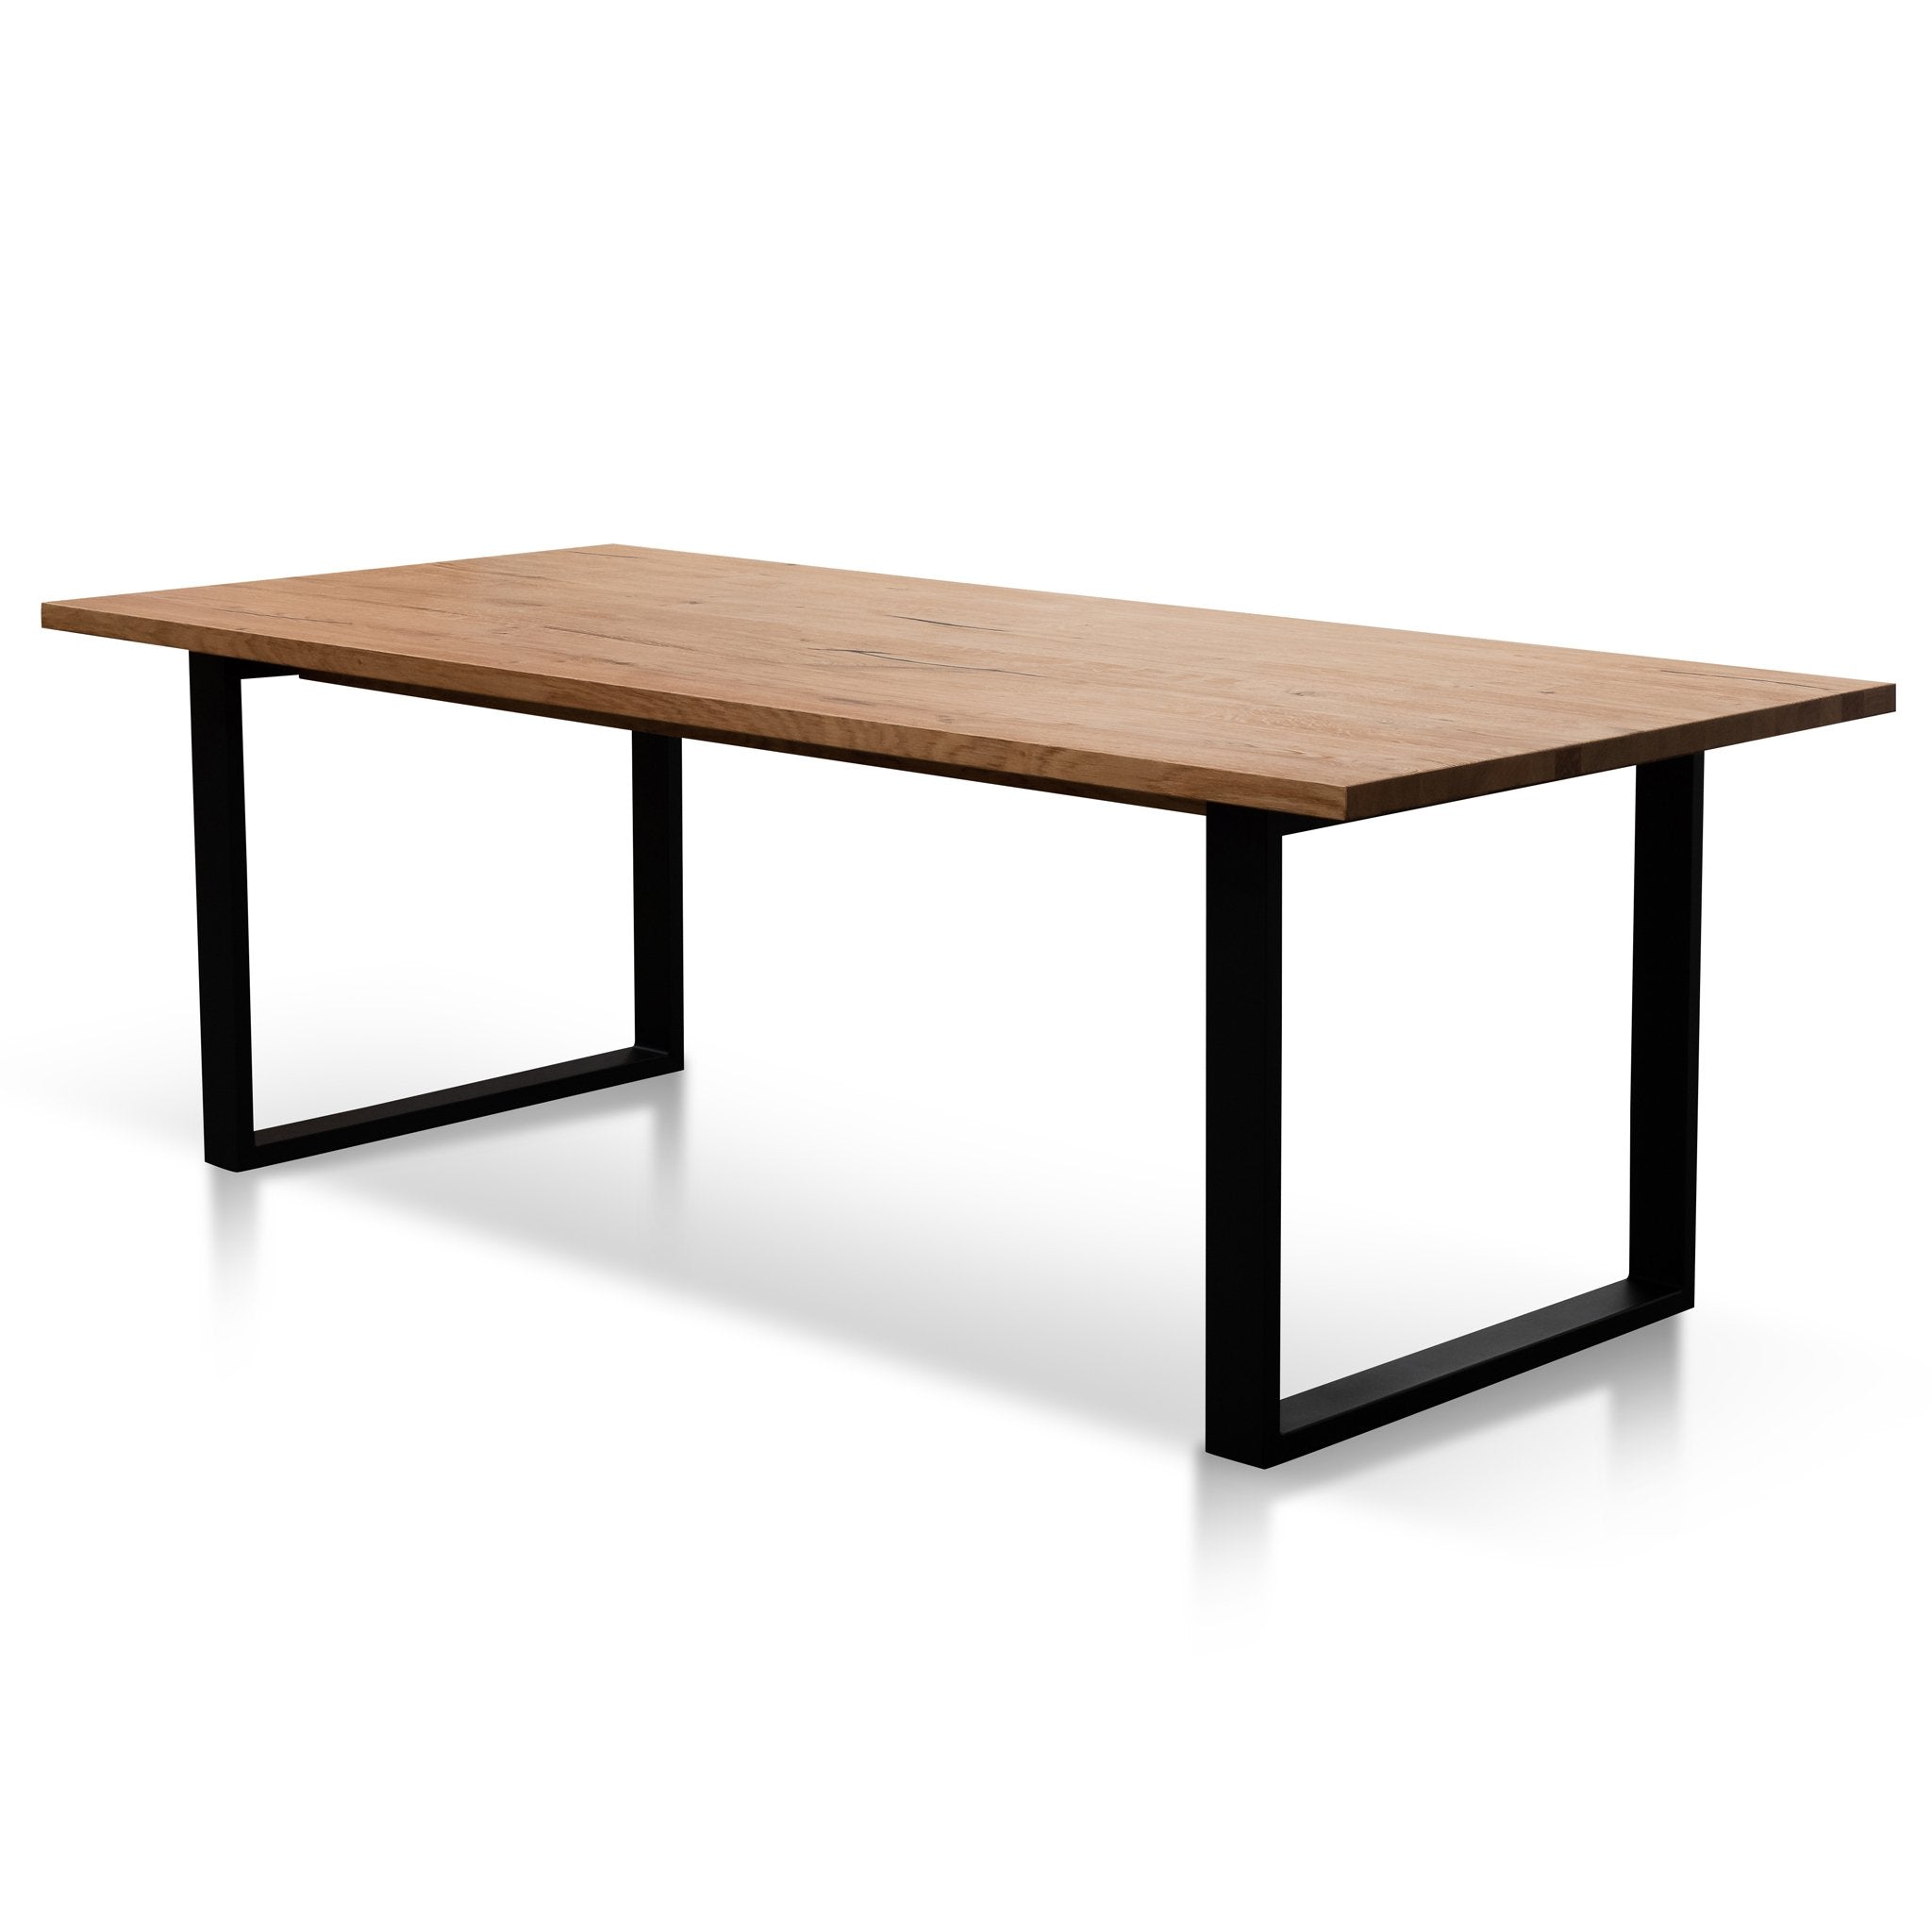 Damian 2.2m Straight Top Dining Table - Rustic Oak - Dining Tables